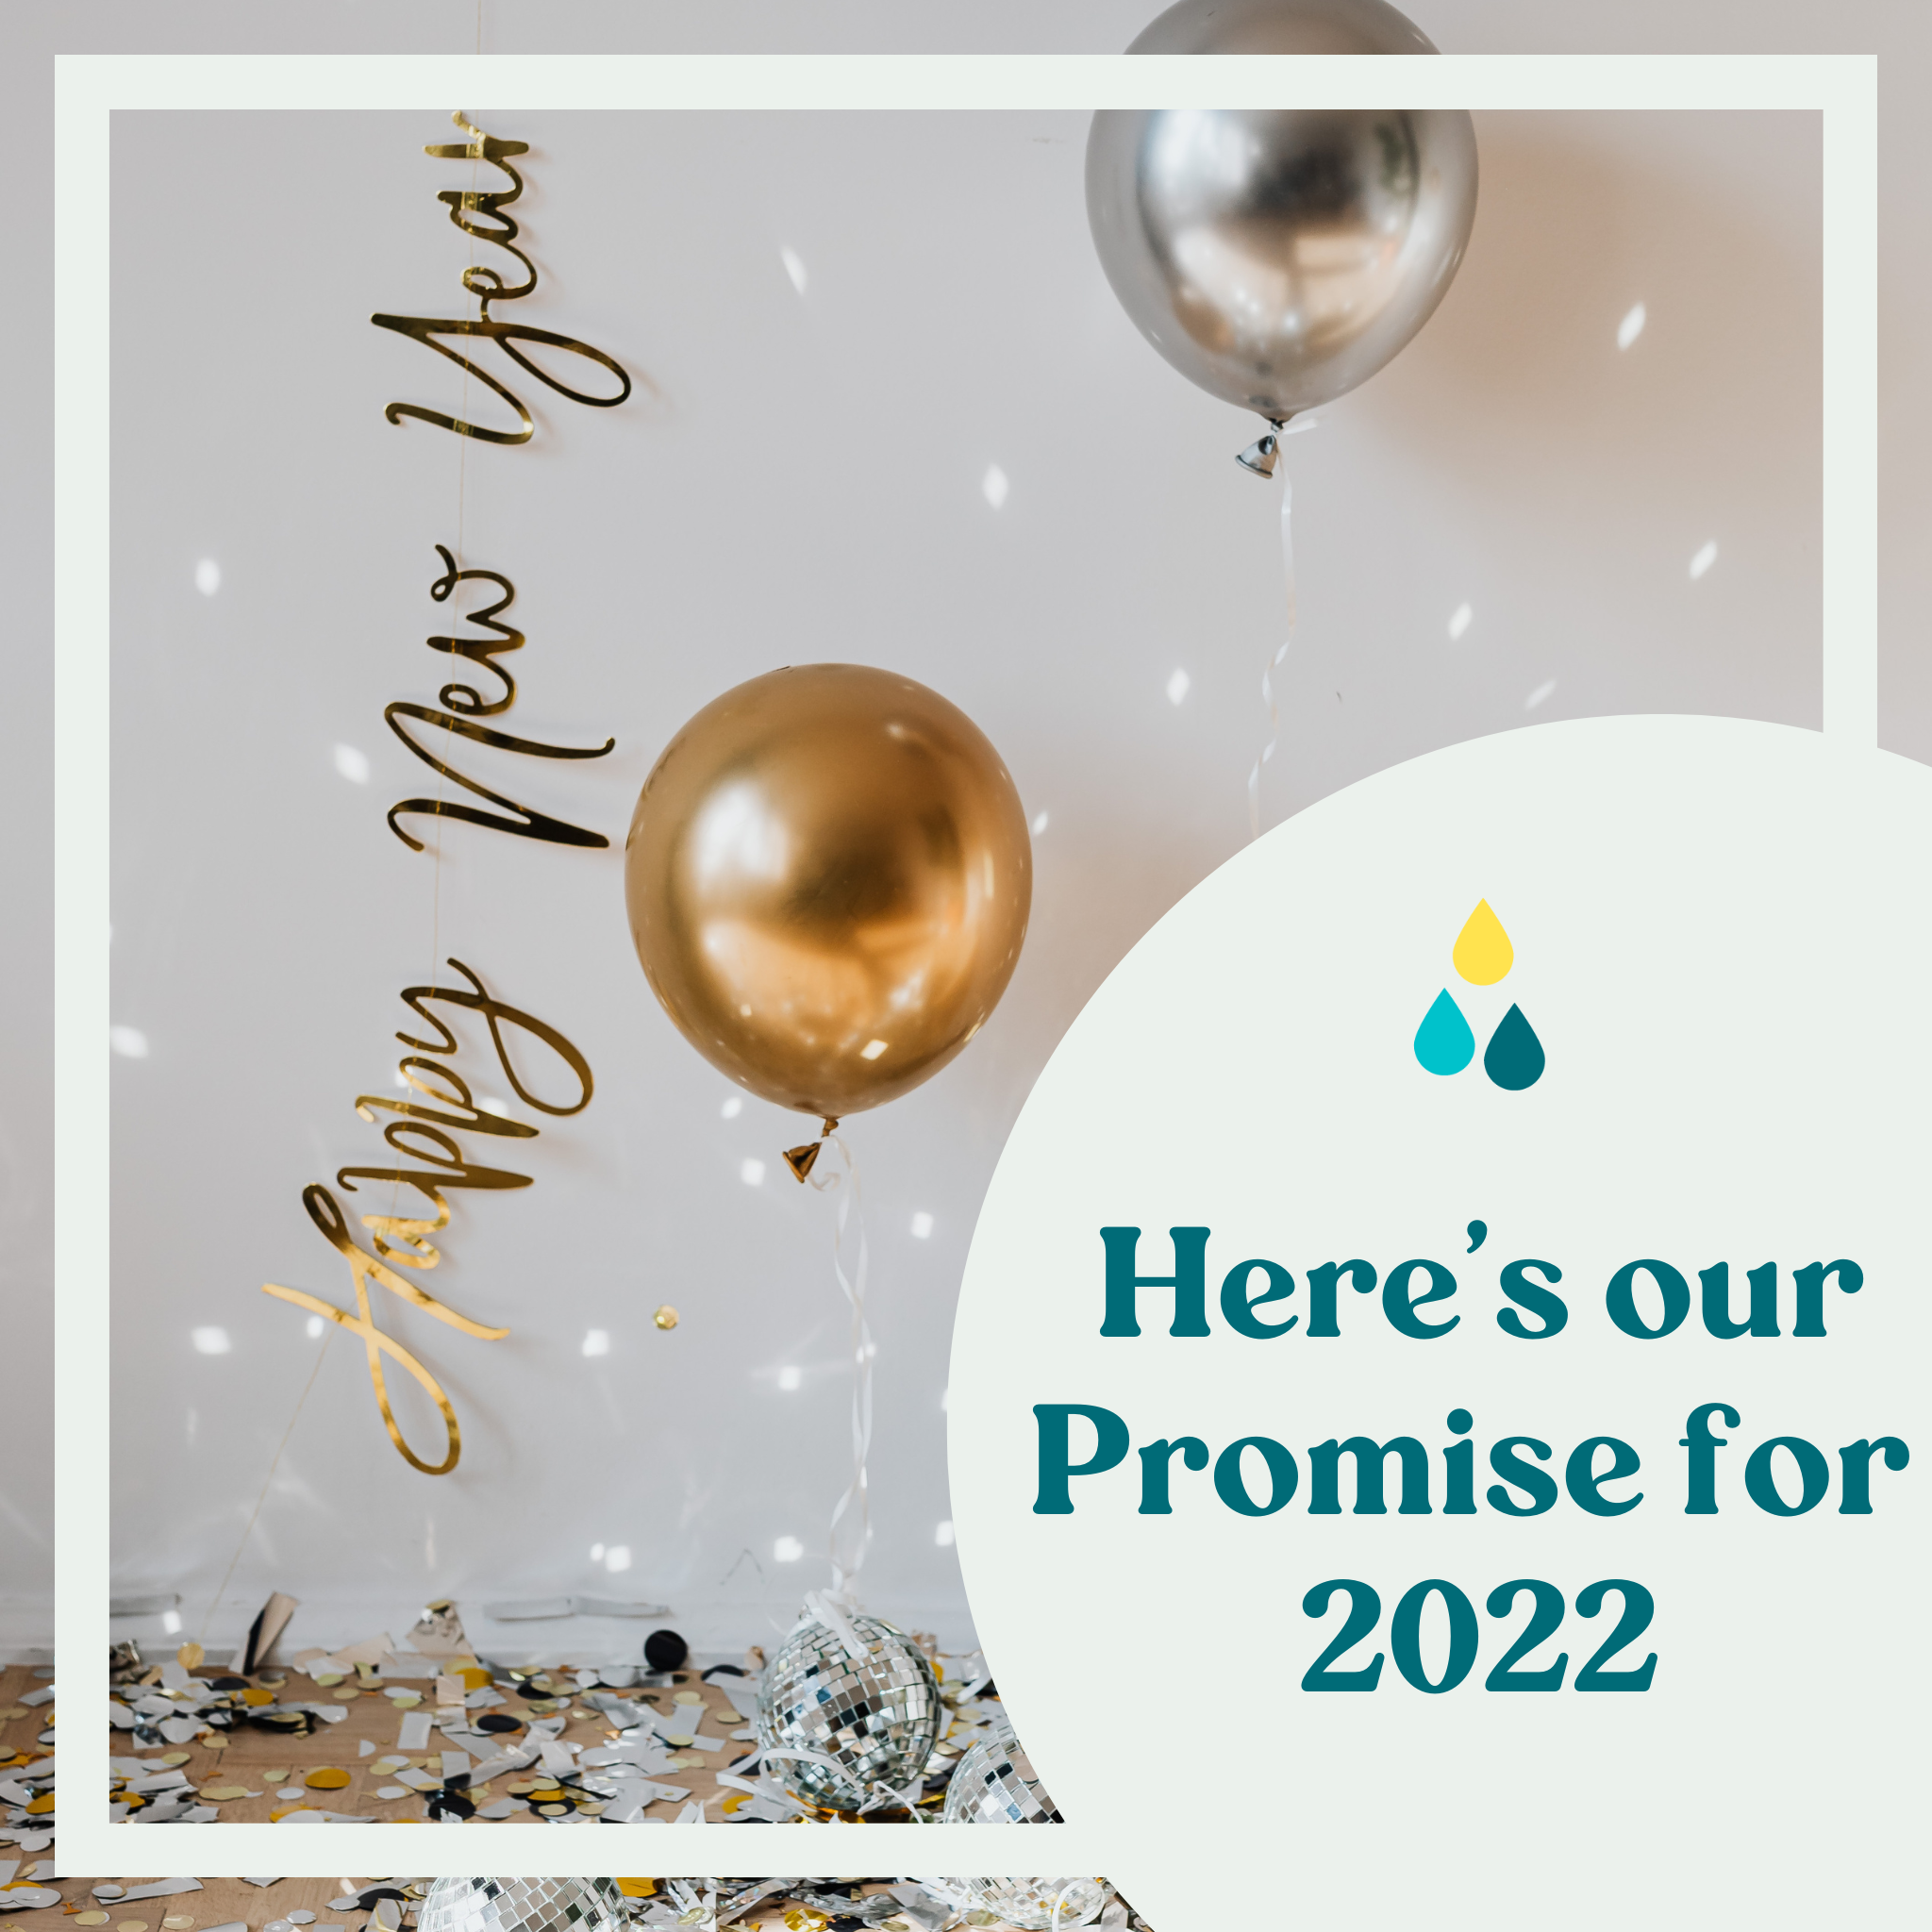 Here’s our Promise for 2022